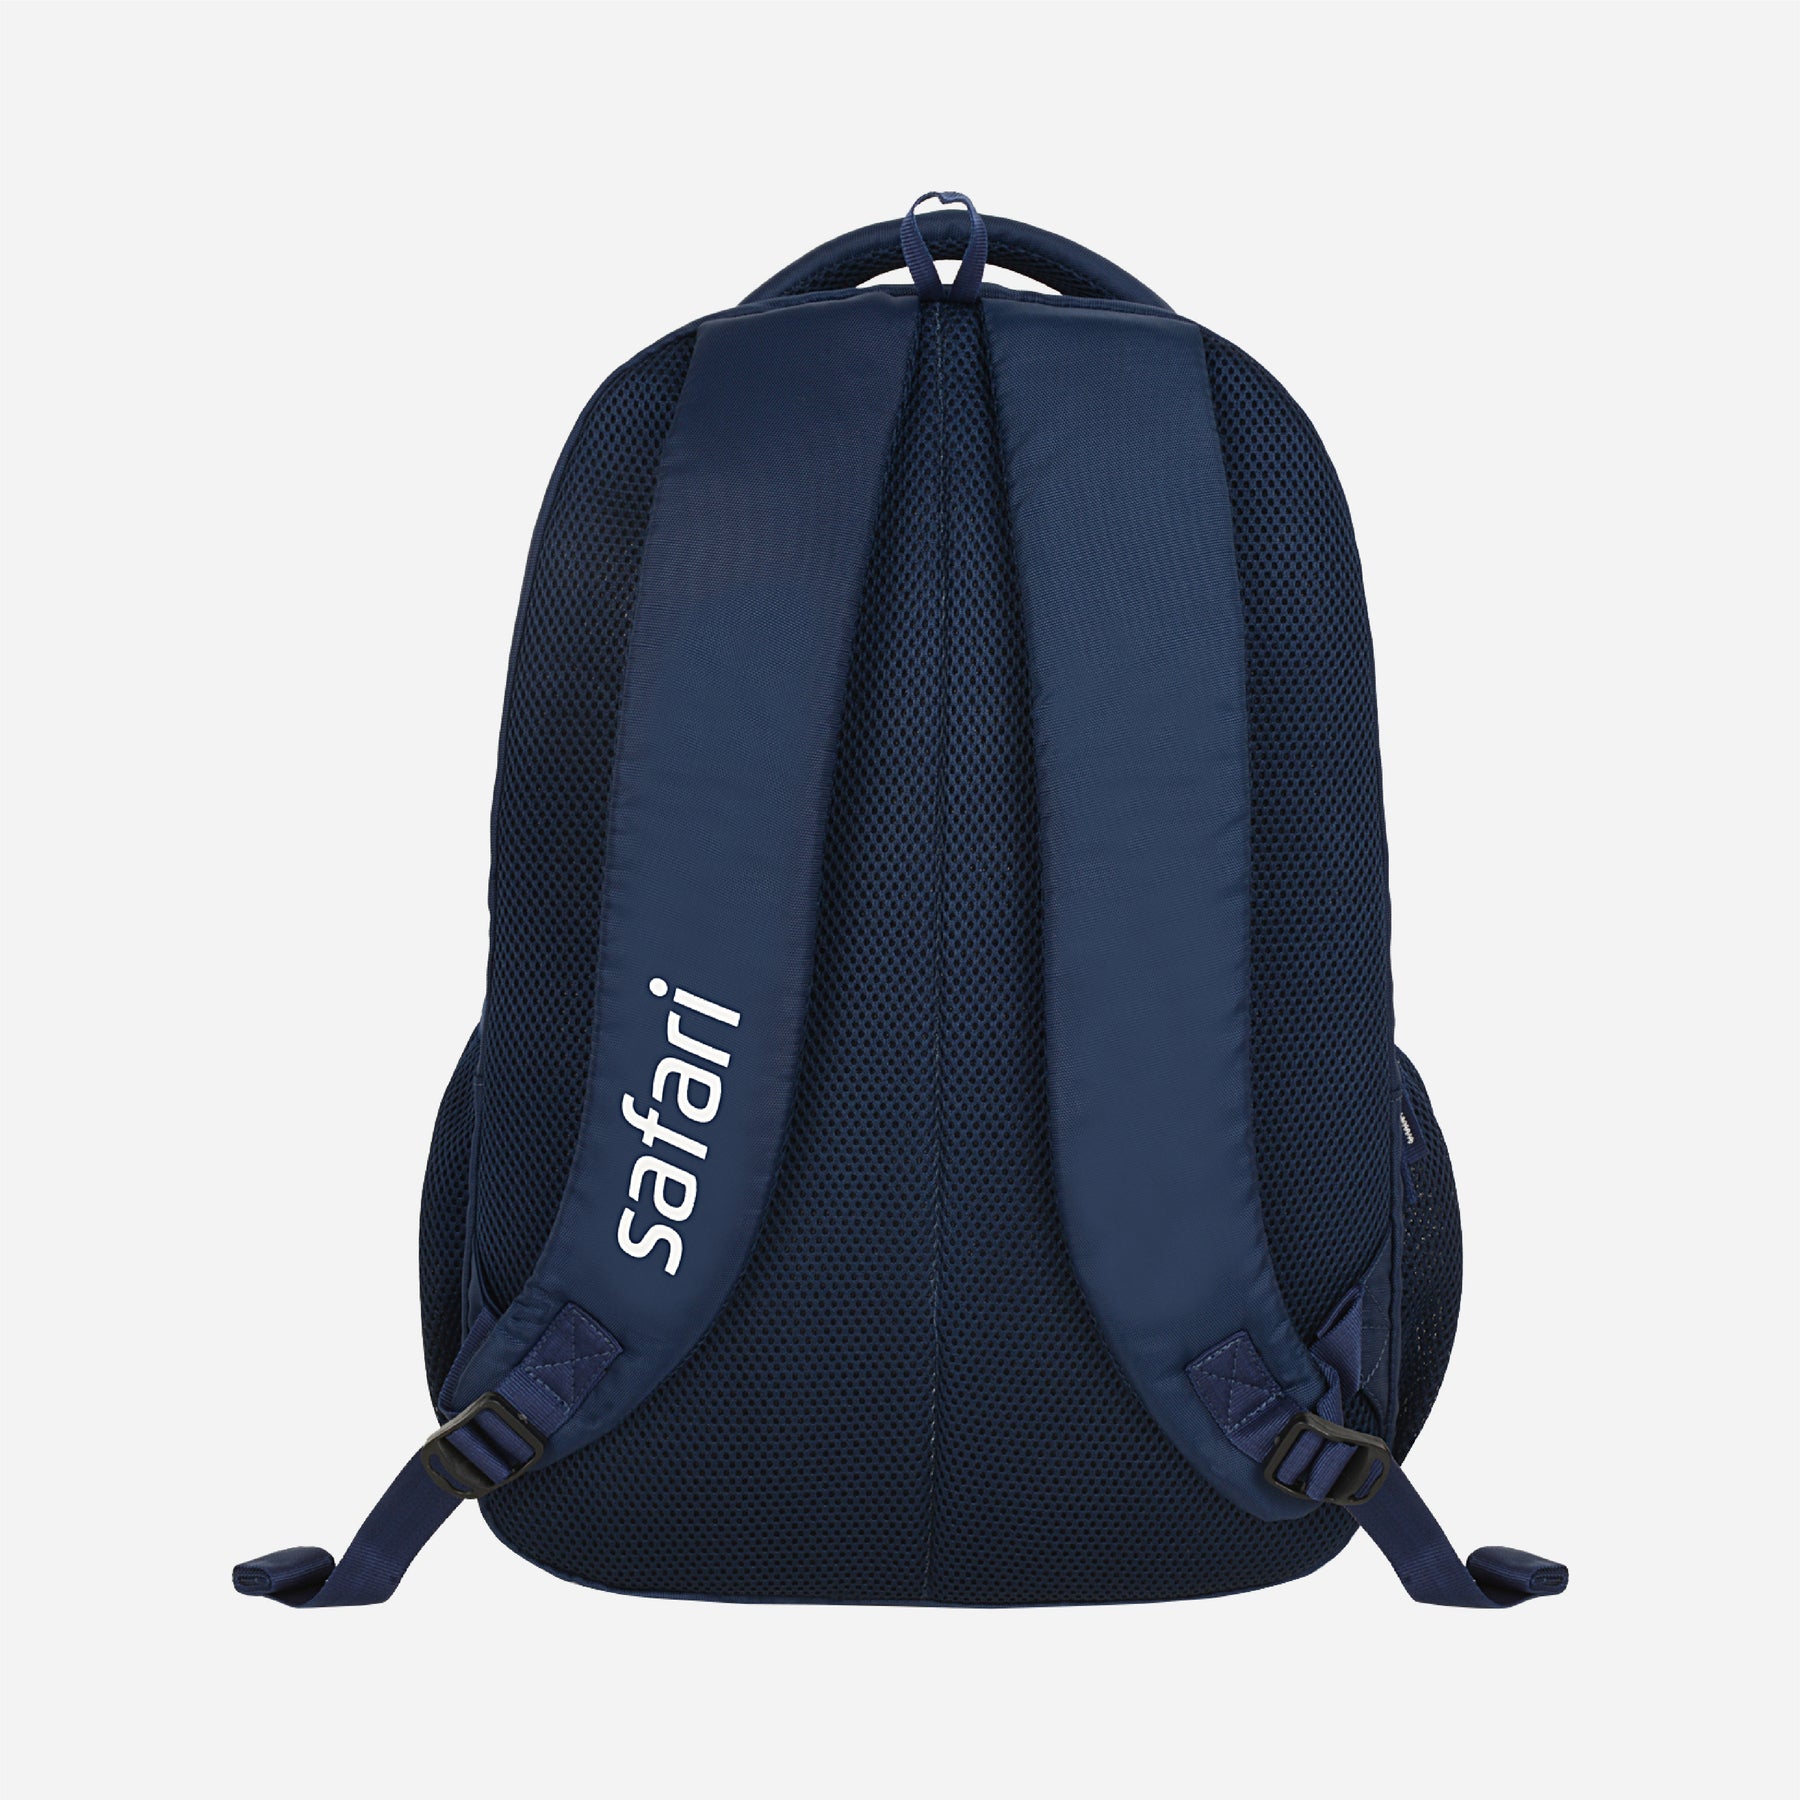 Deluxe Laptop Backpack - Blue